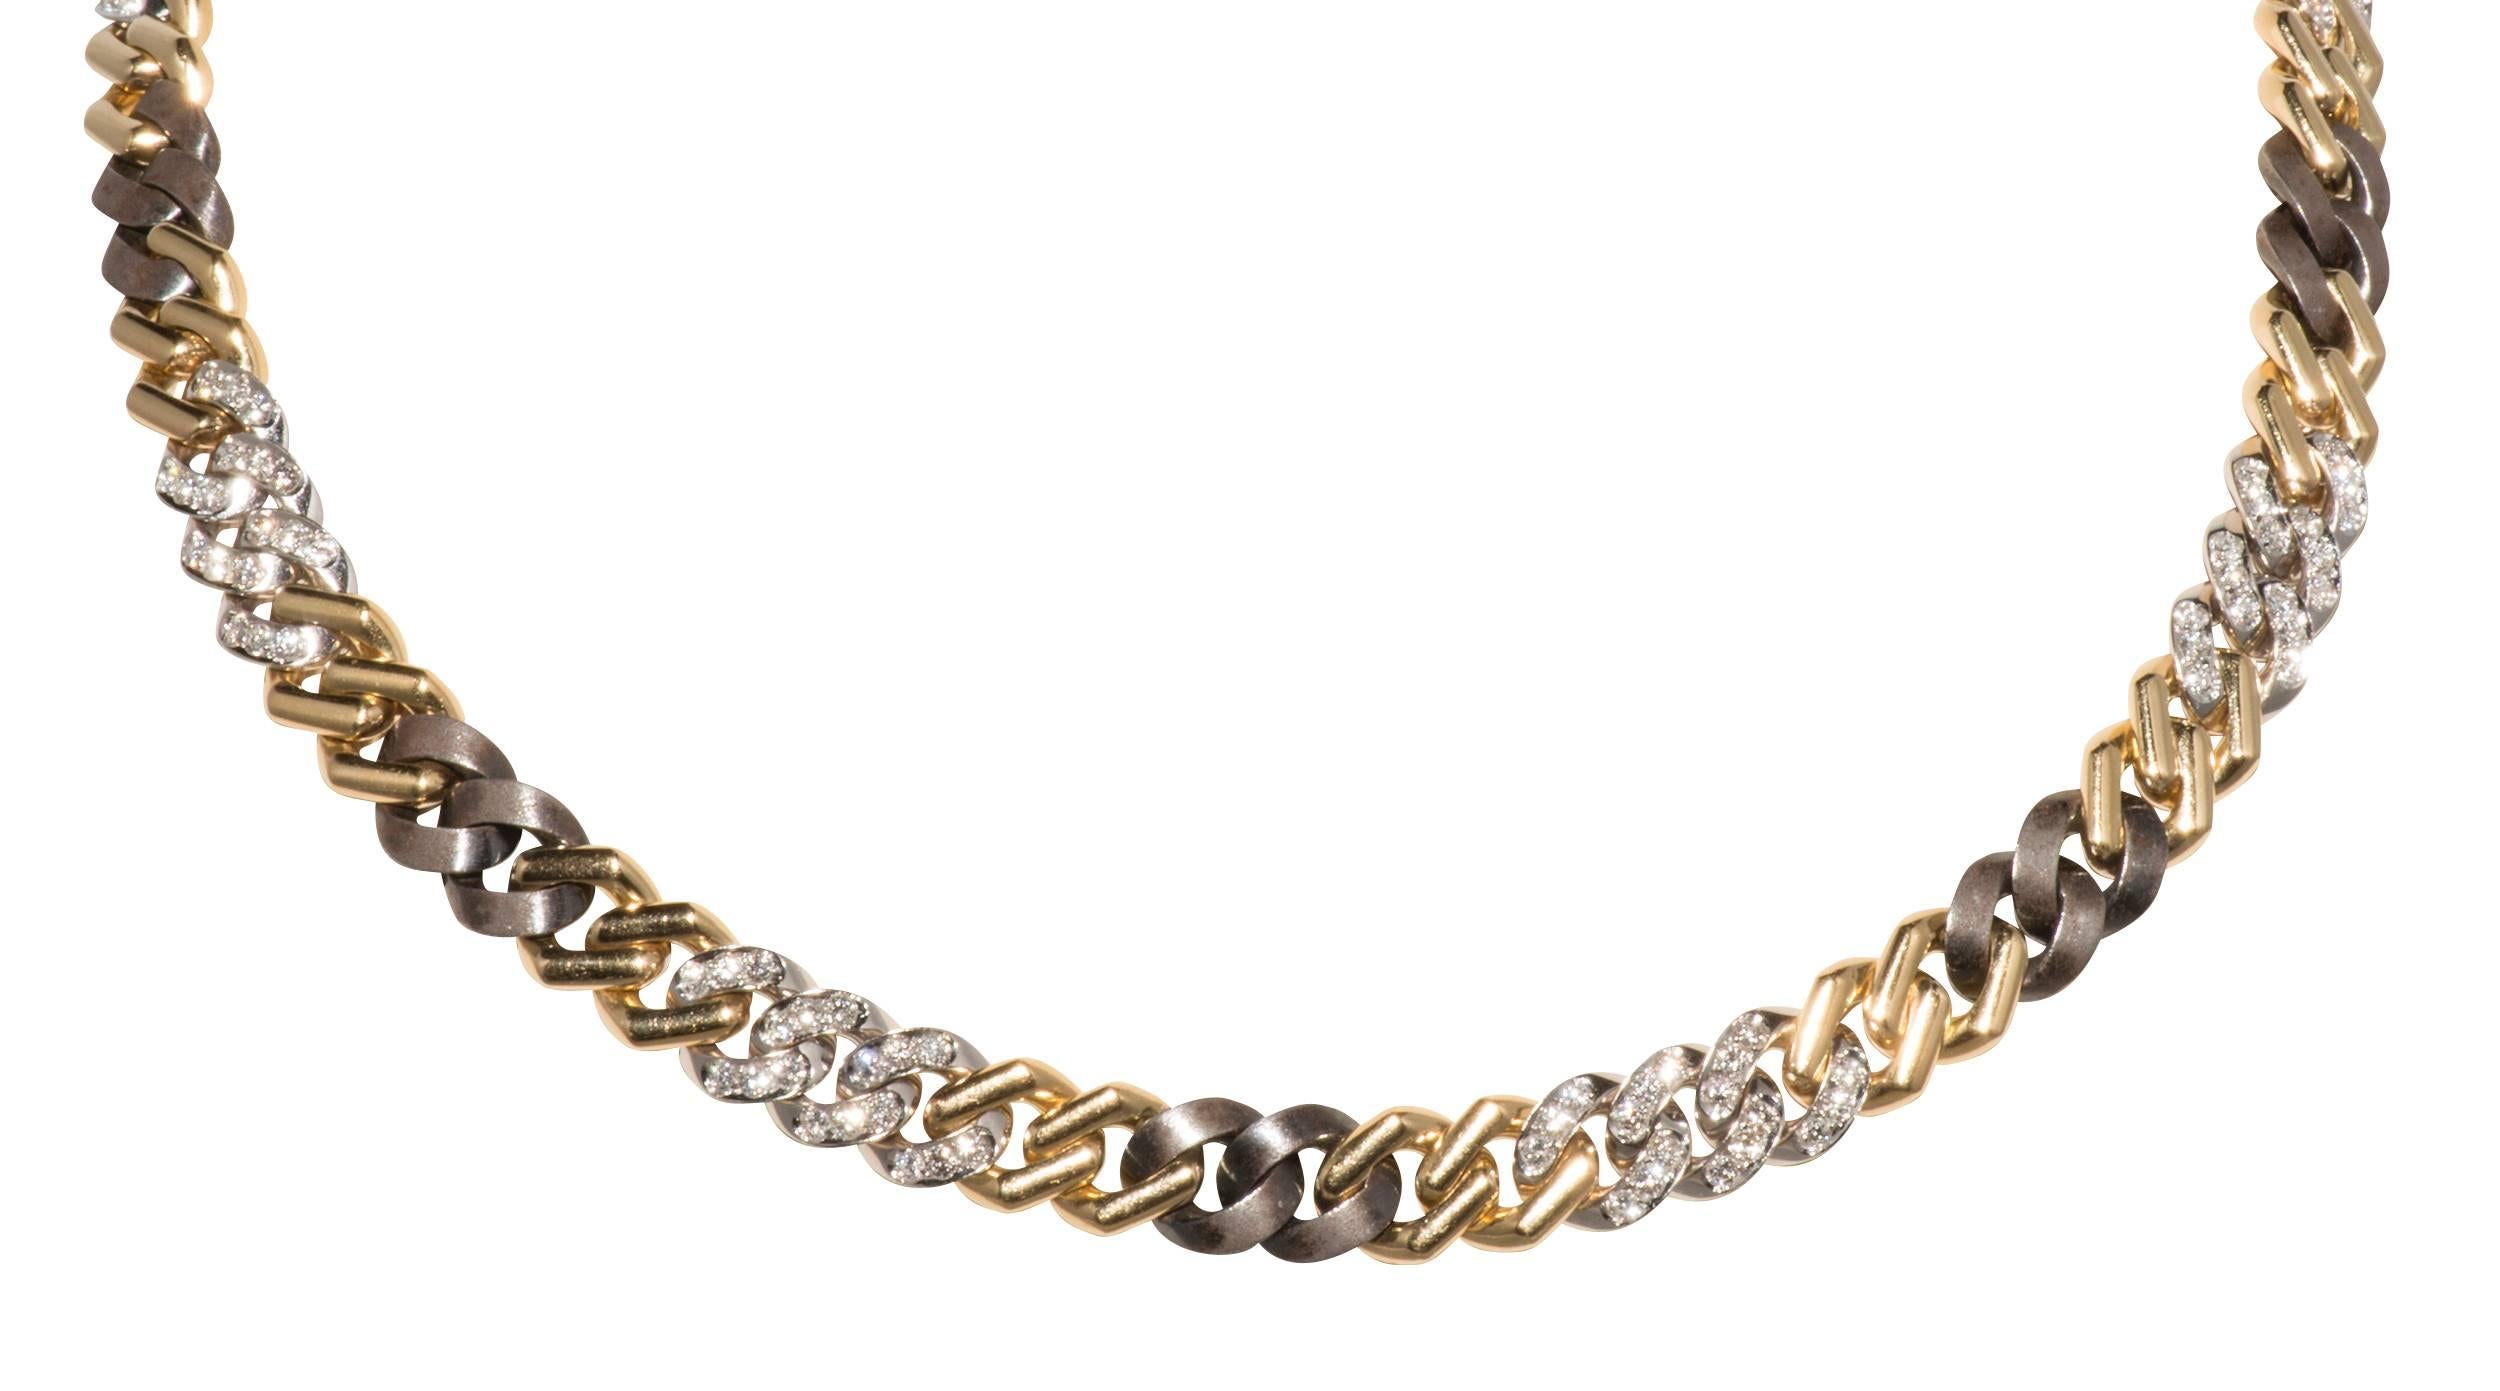 This is a beautiful curb link necklace made of yellow gold, diamonds and patinated steel.  It is 16